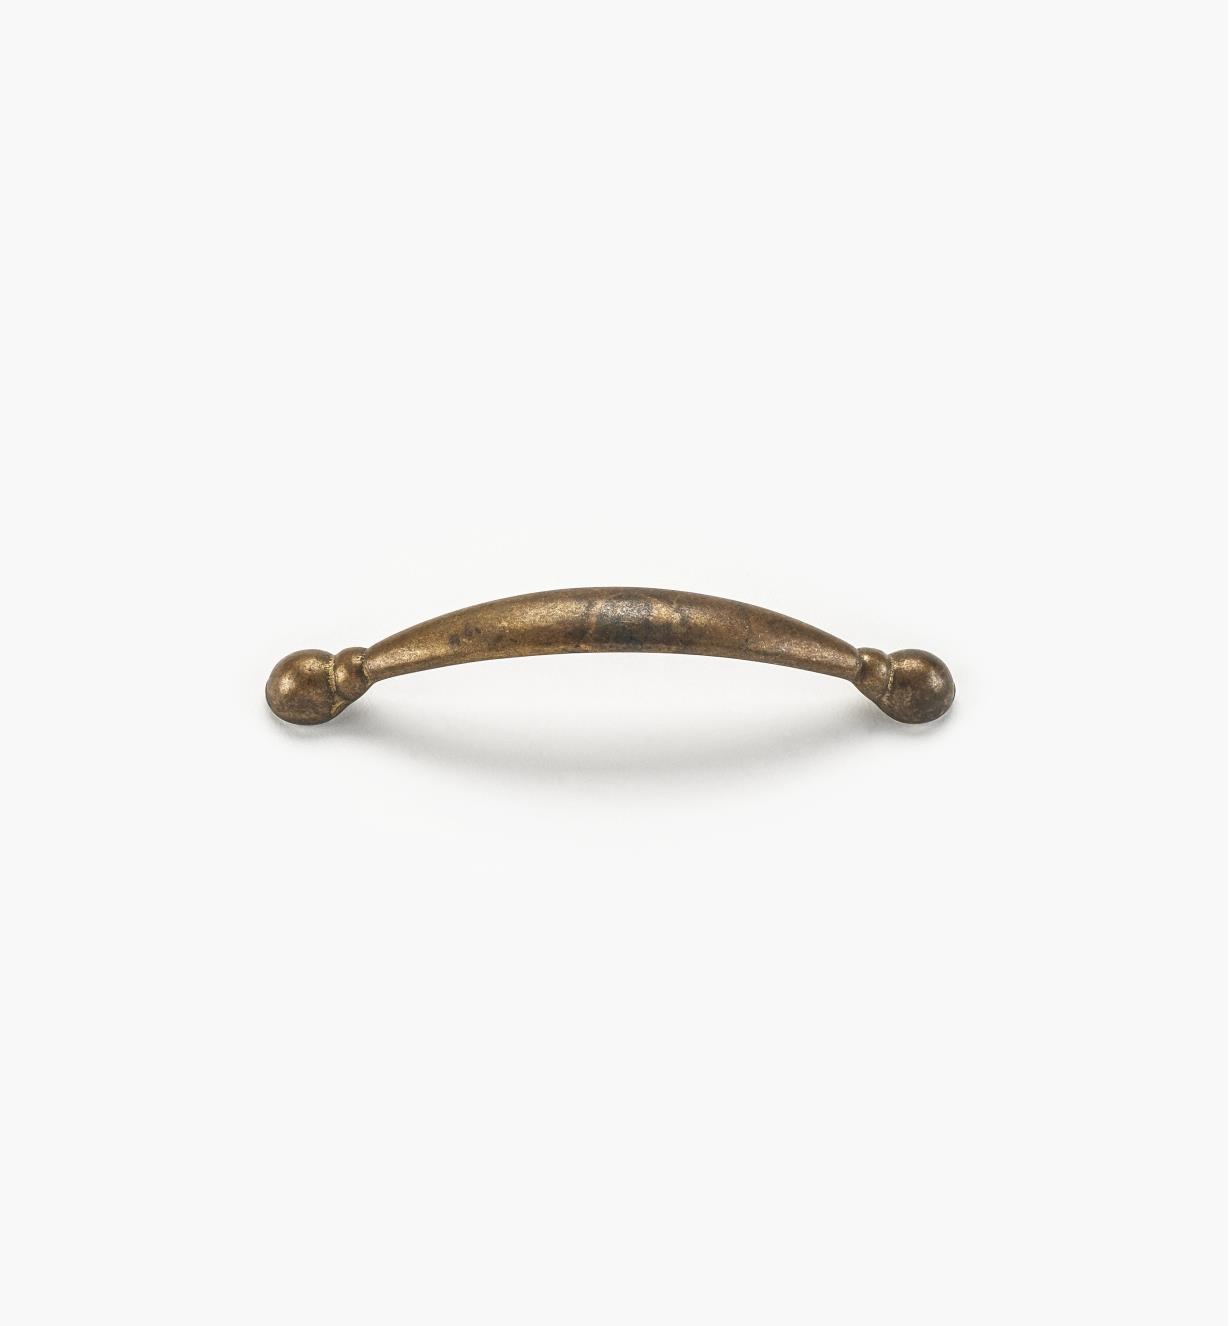 00A2912 - 96mm Old Brass Handle